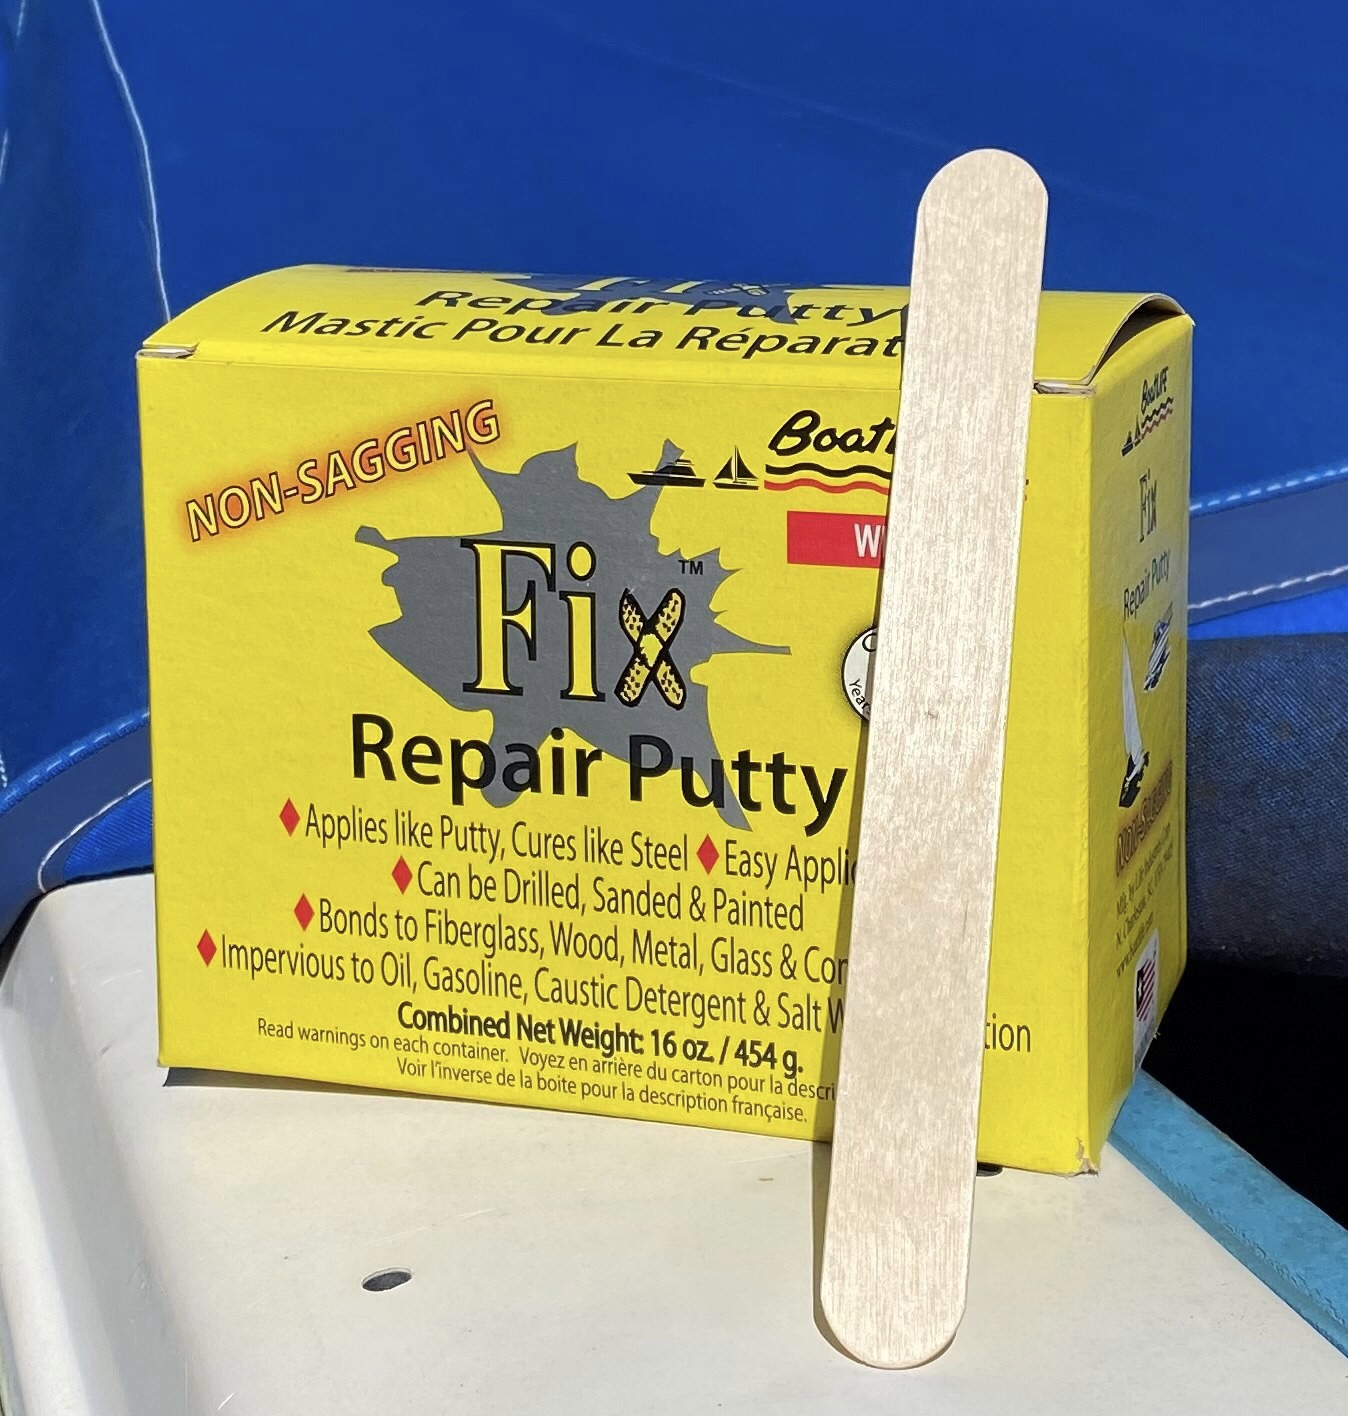 Fix Repair Putty January promotion